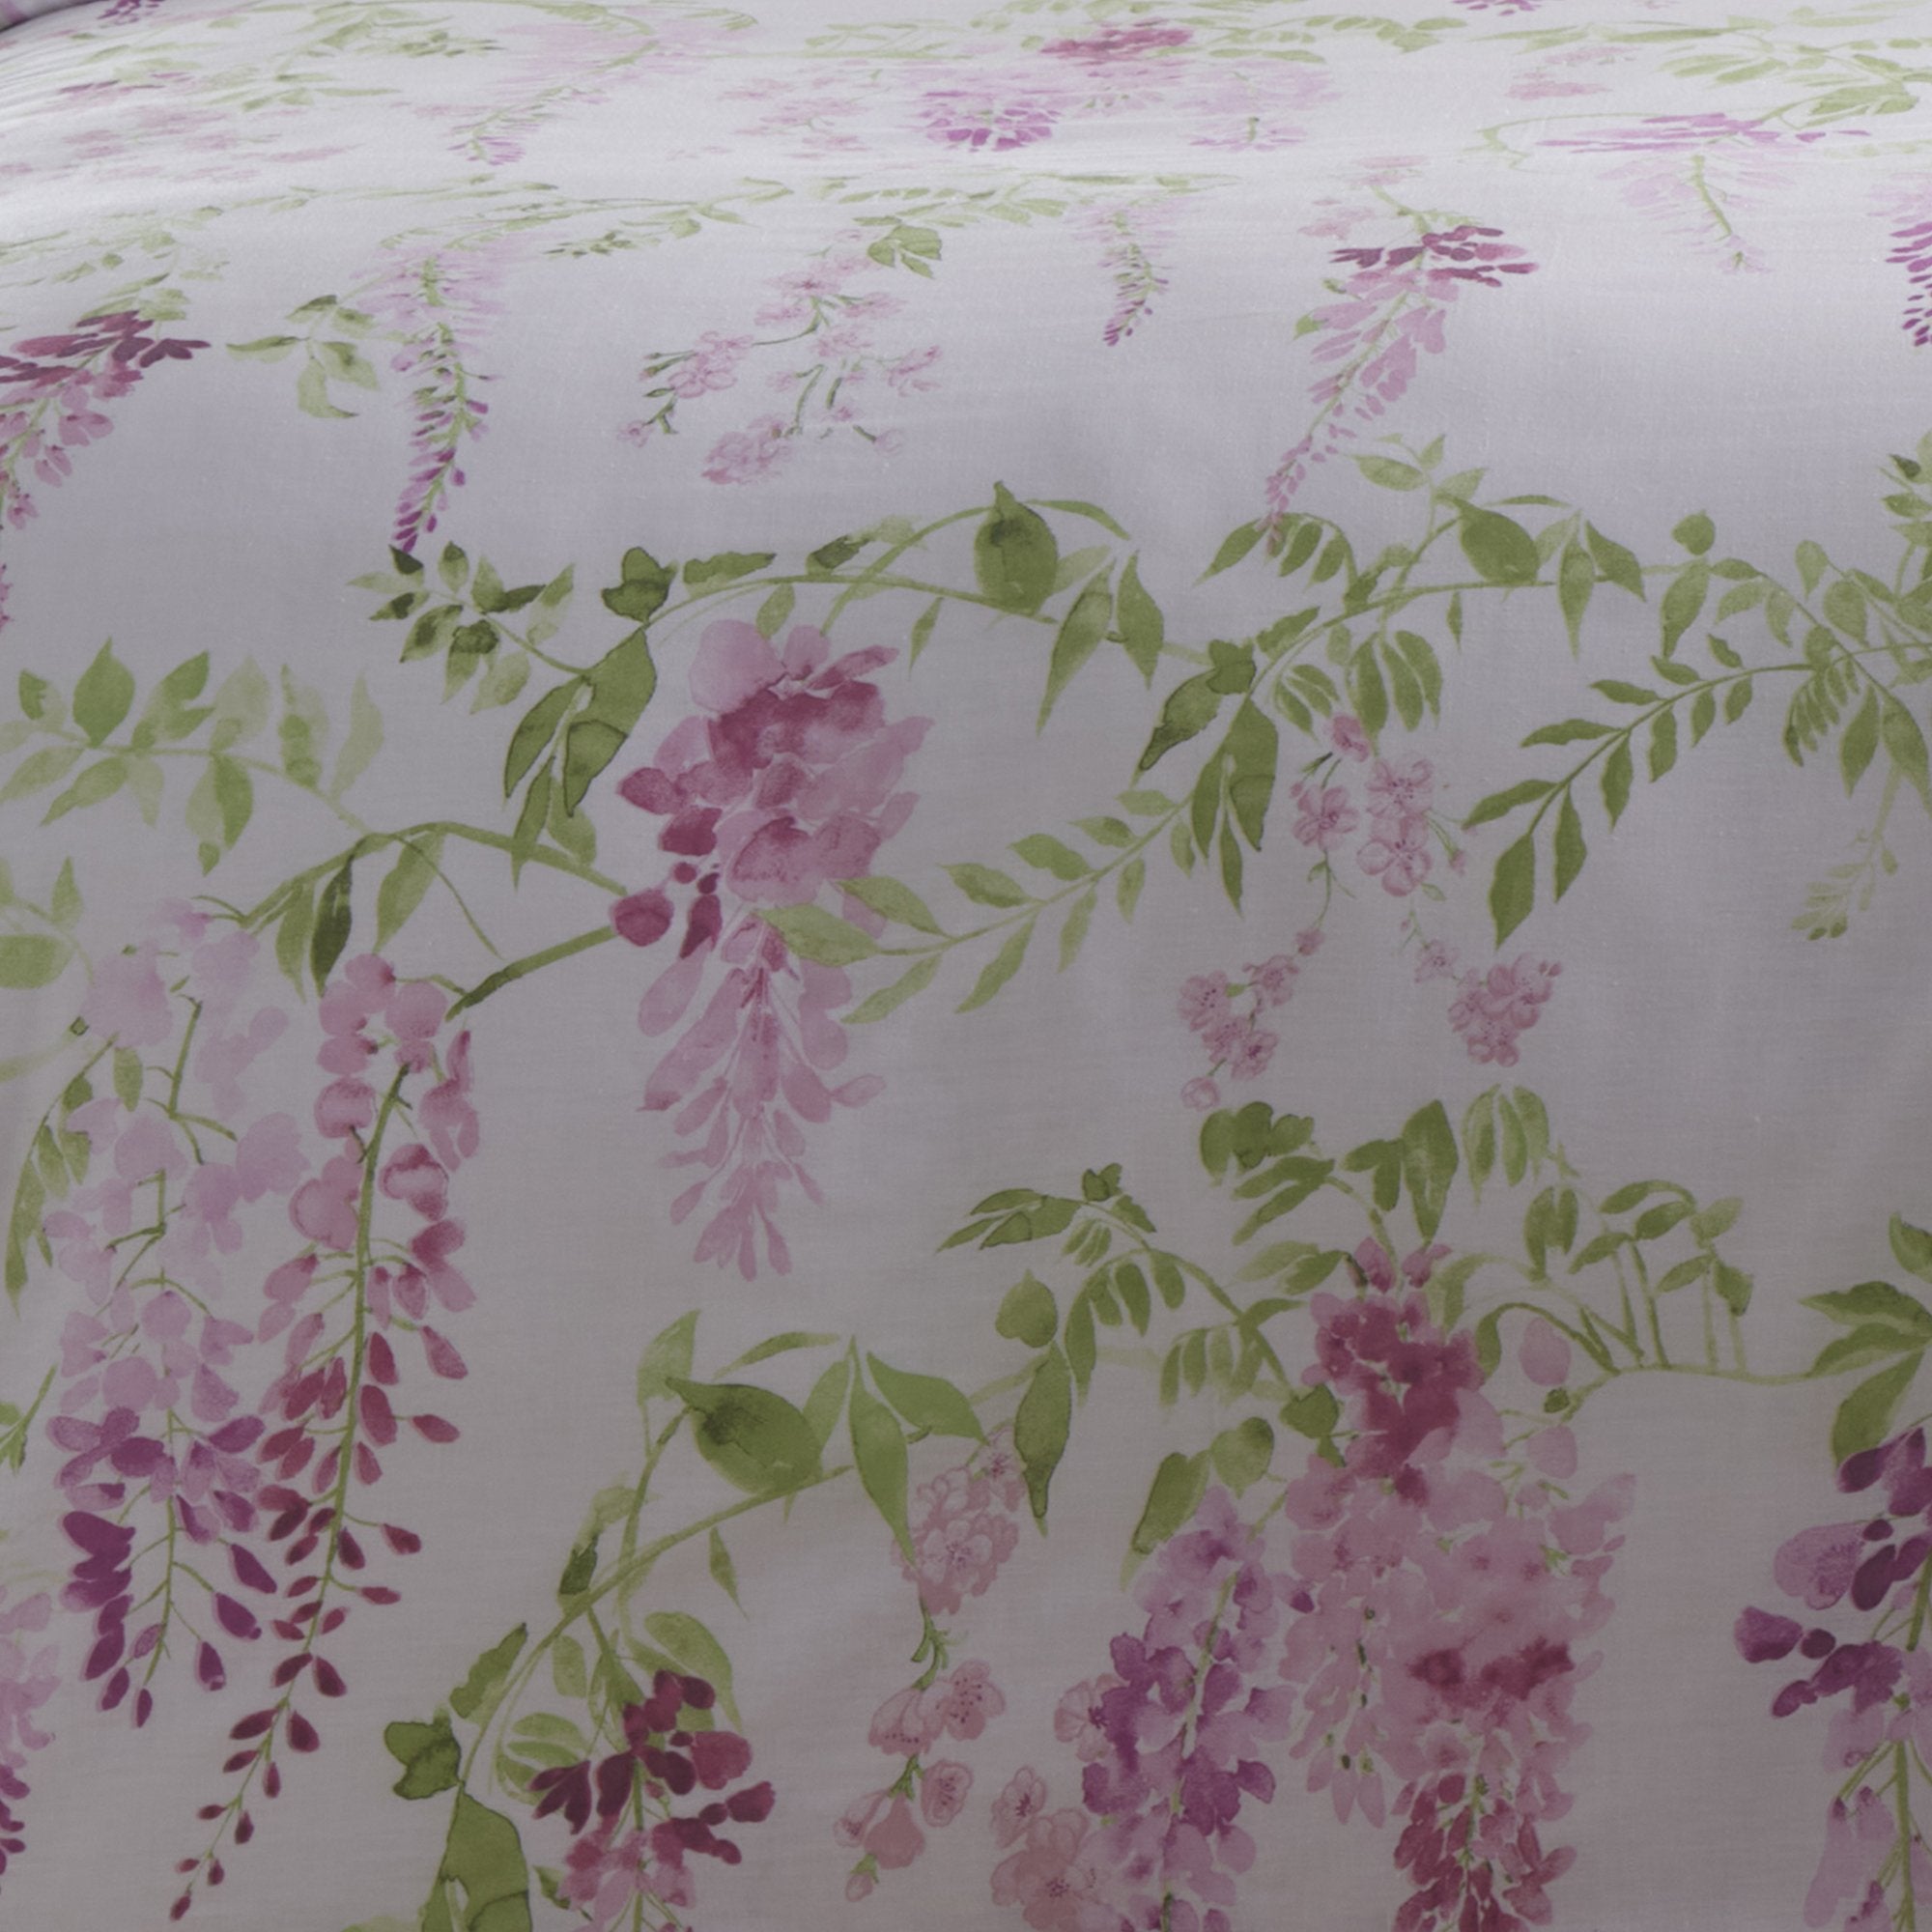 Duvet Cover Set Wisteria by Dreams & Drapes Design in Pink